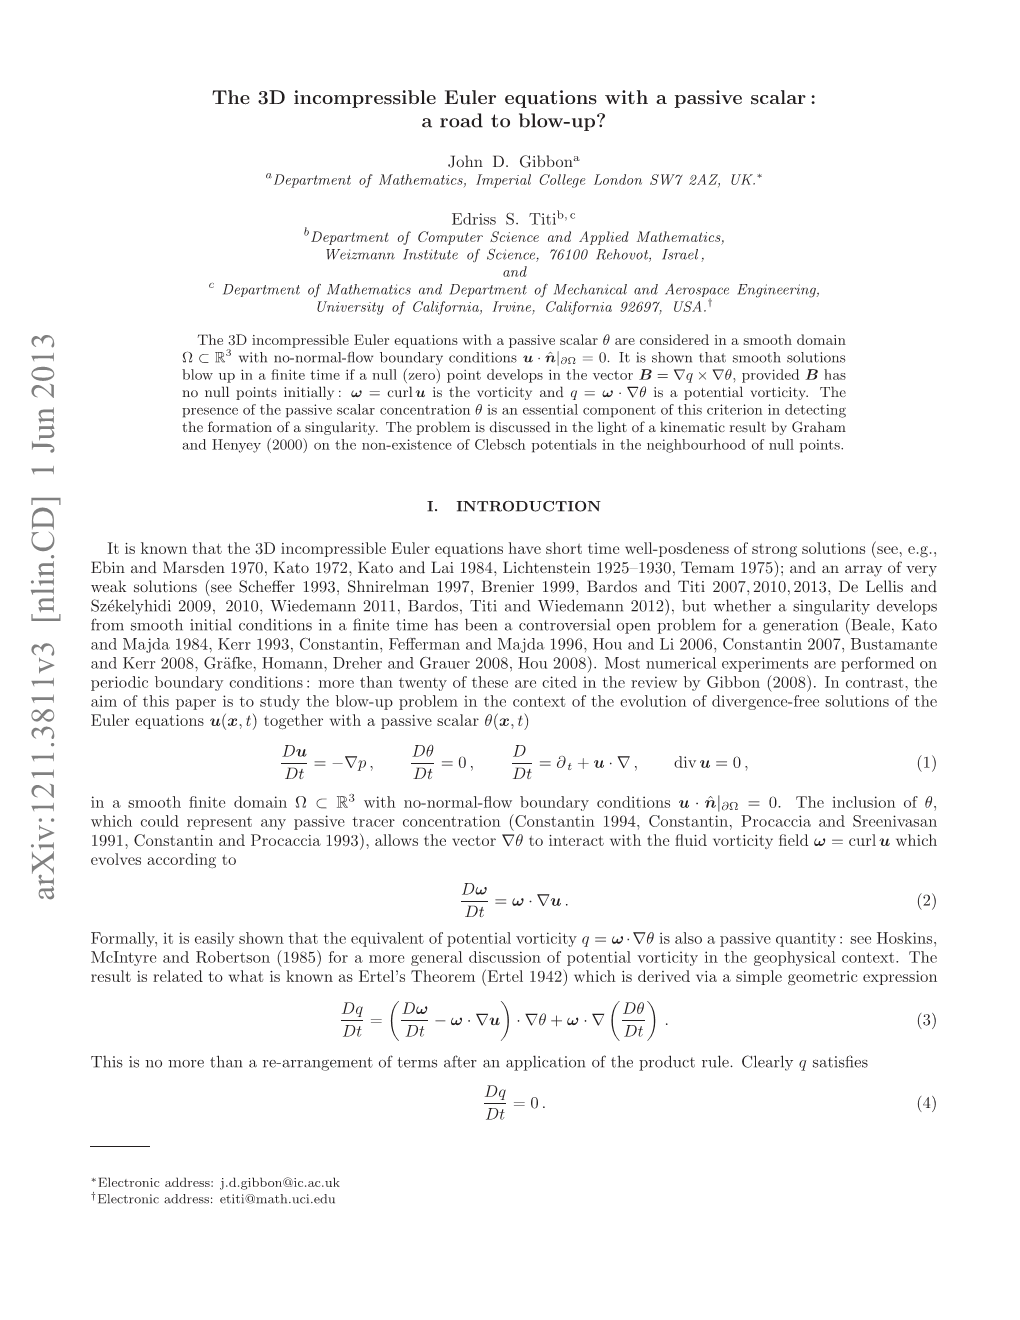 The 3D Incompressible Euler Equations with a Passive Scalar: A